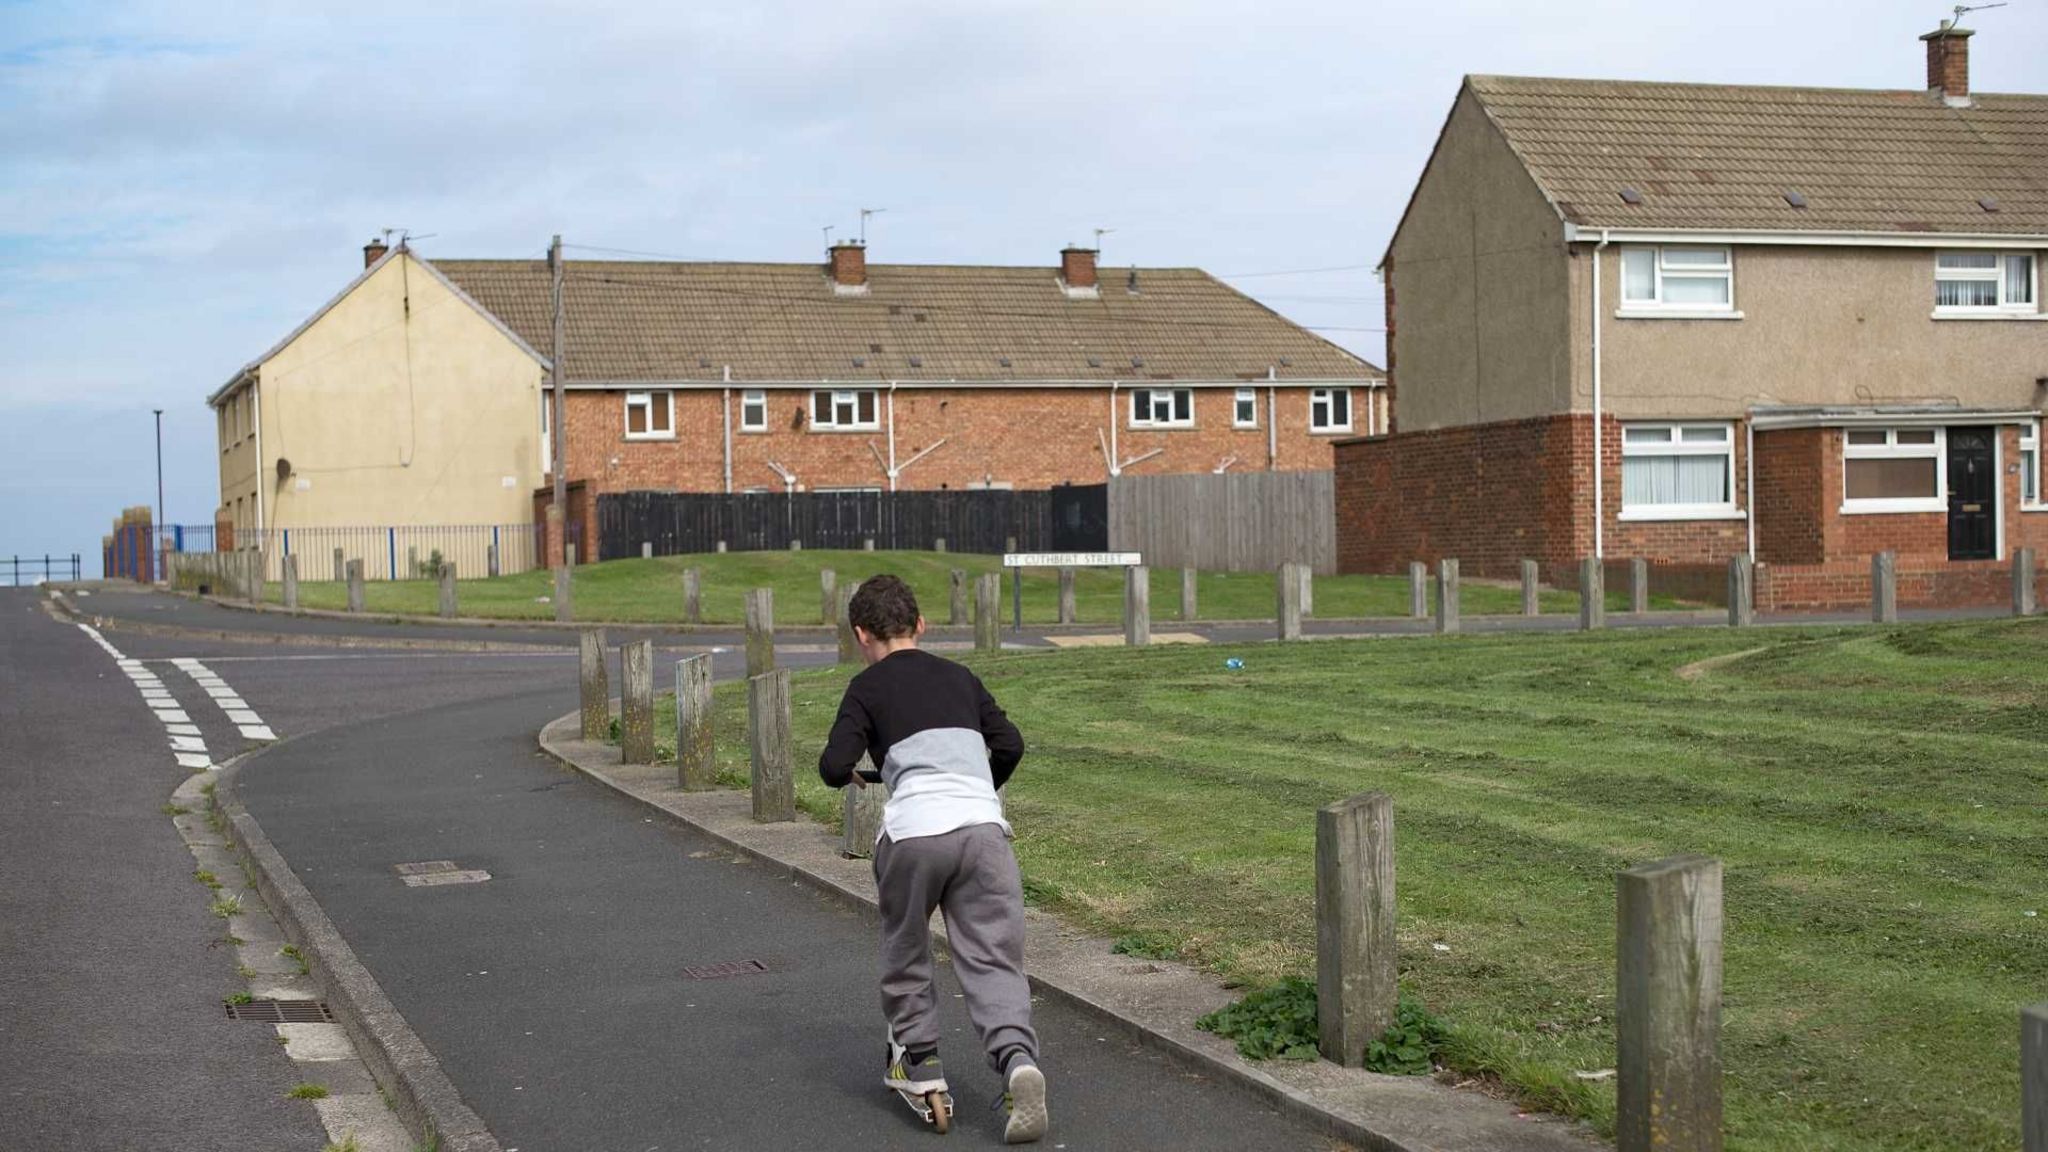 Child riding a scooter on a housing estate in Hartlepool